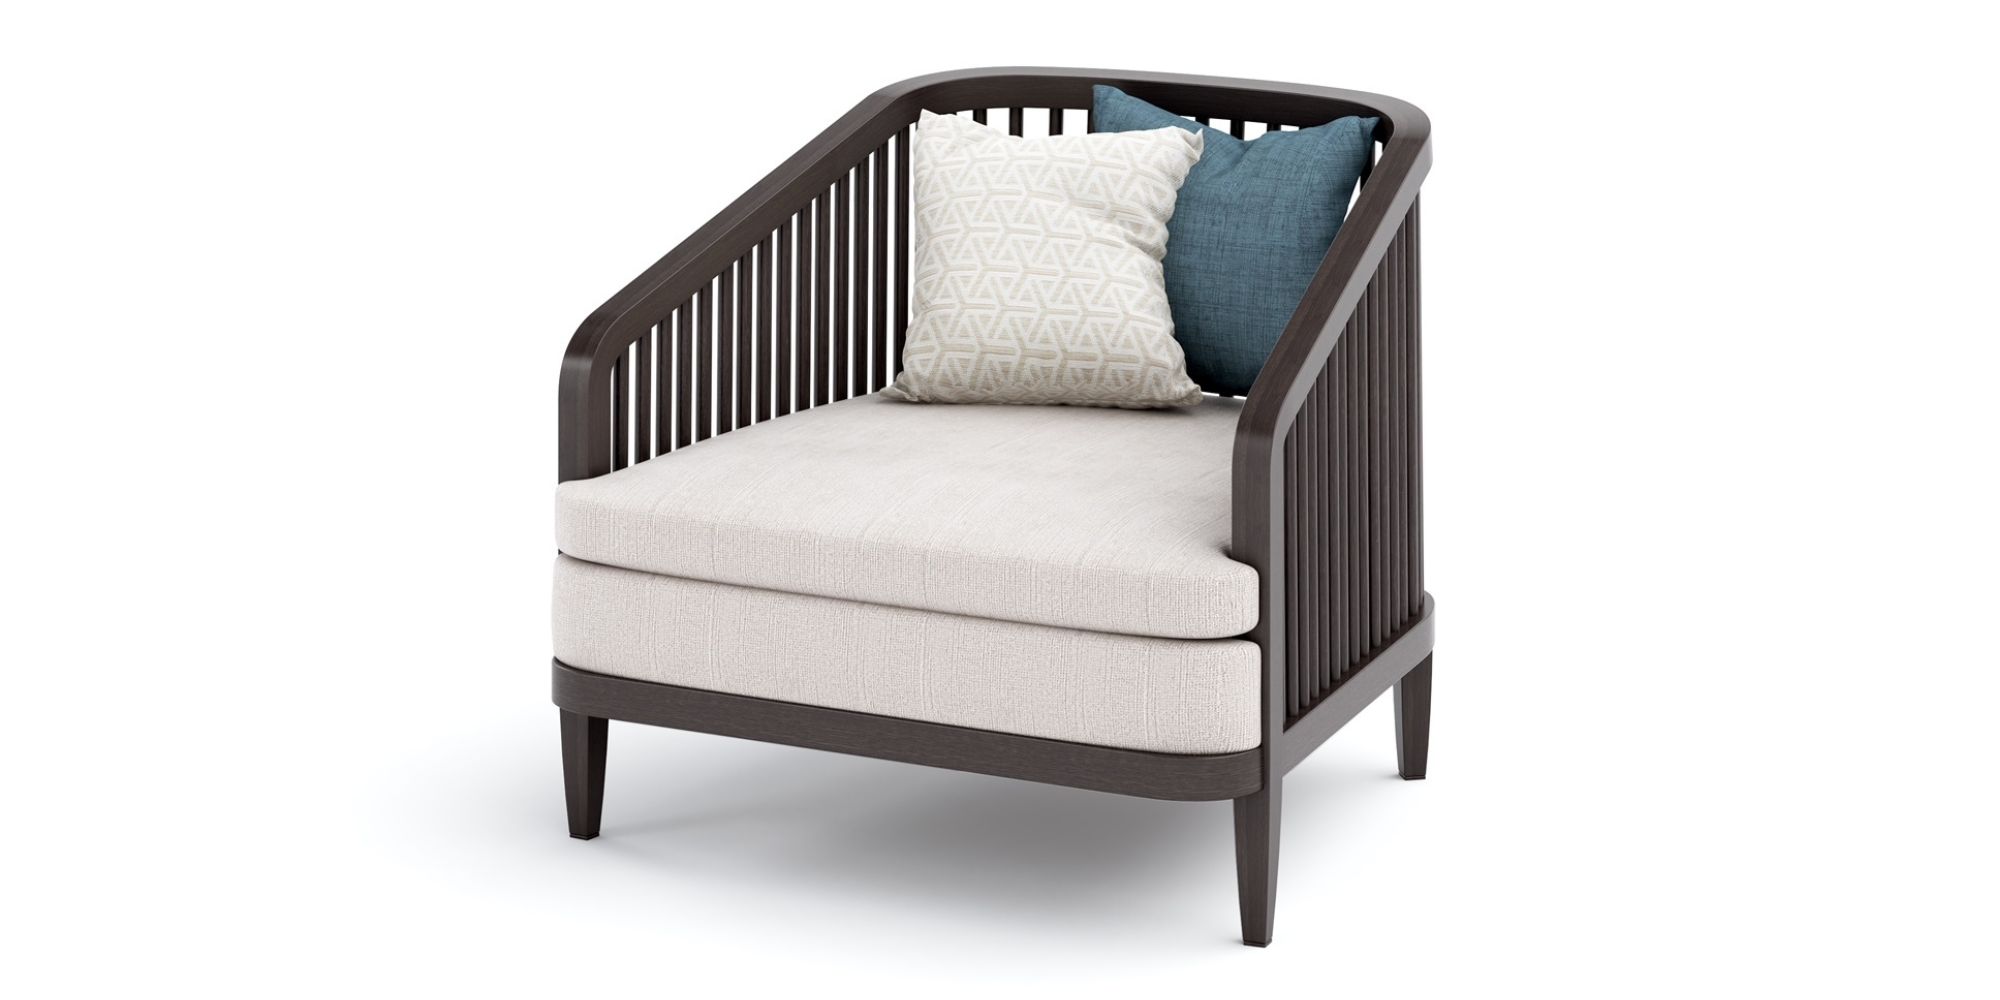 Largo Lounger in Outdoor Loungers for Largo collection